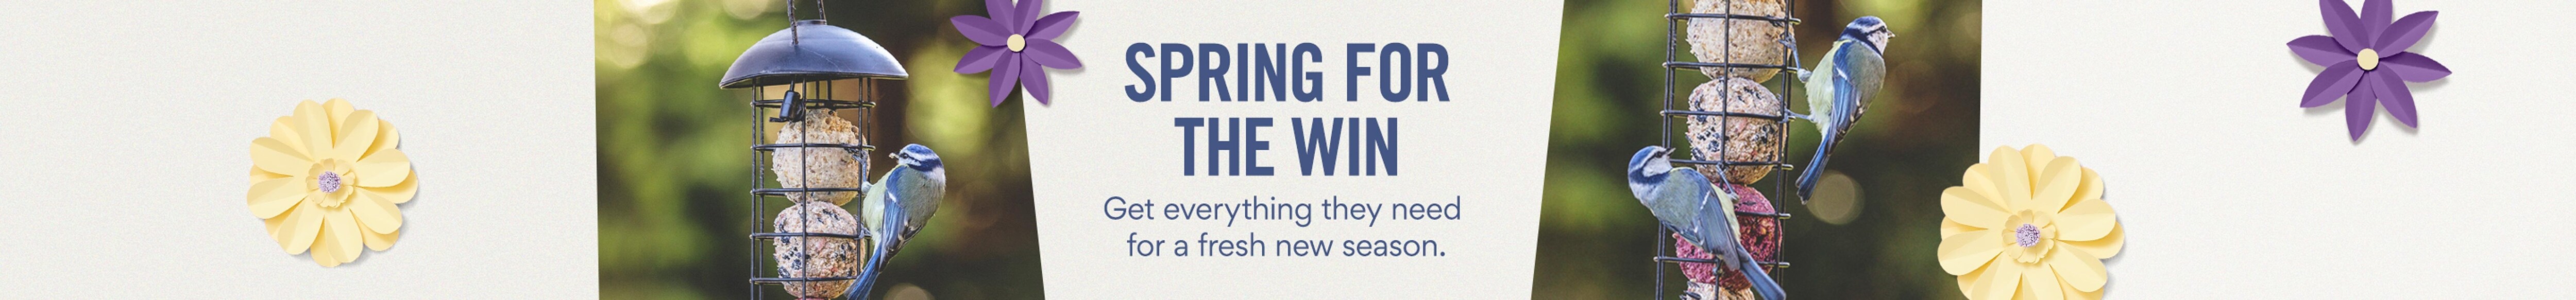 Spring For the Win: Get Everything they need for a fresh new season